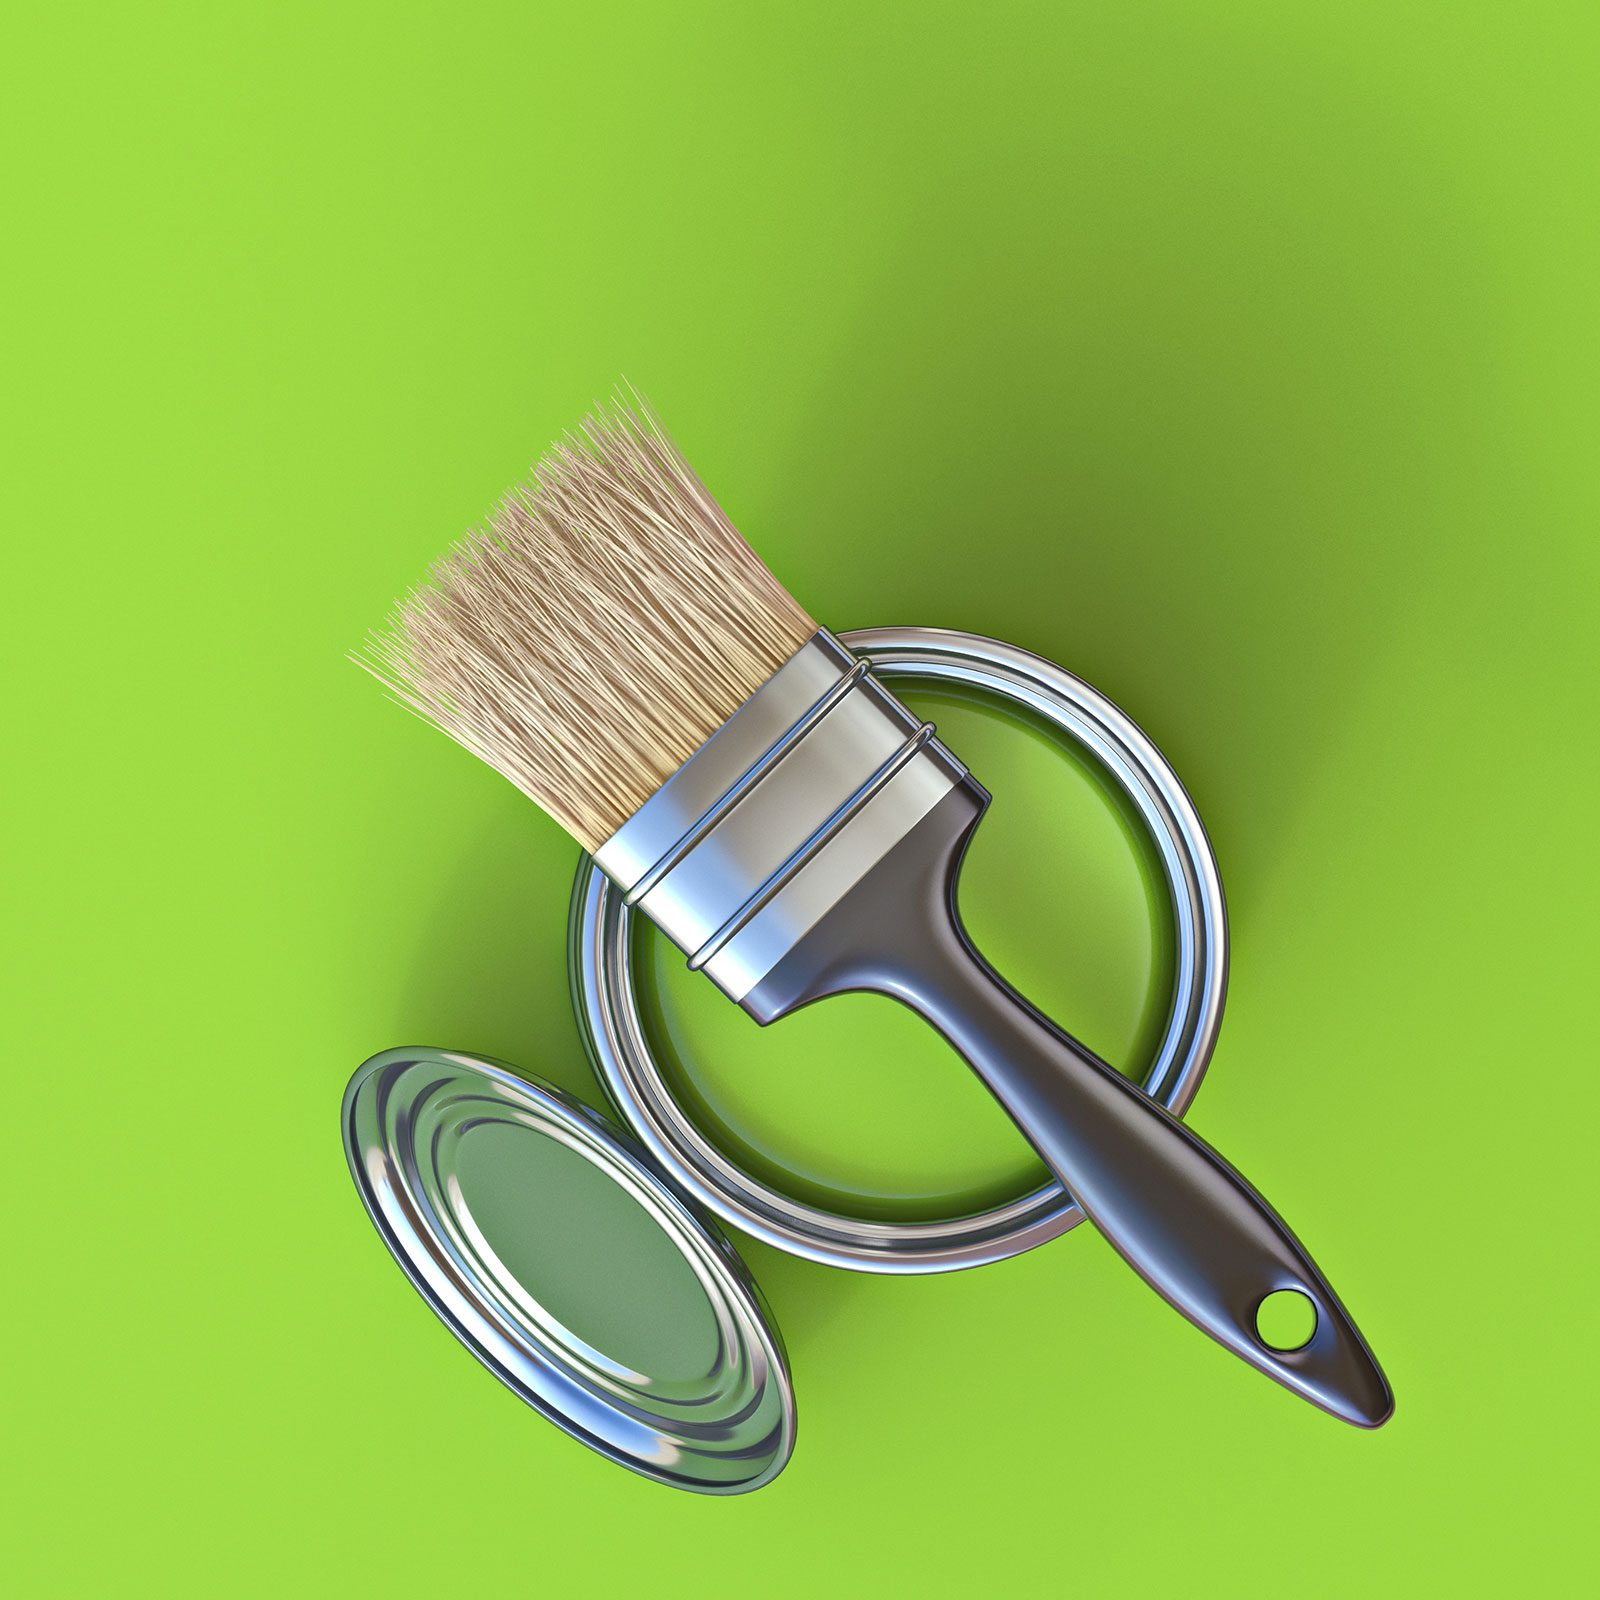 Paintbrush On Top Of Green Paint Bucket With Green Paint Background